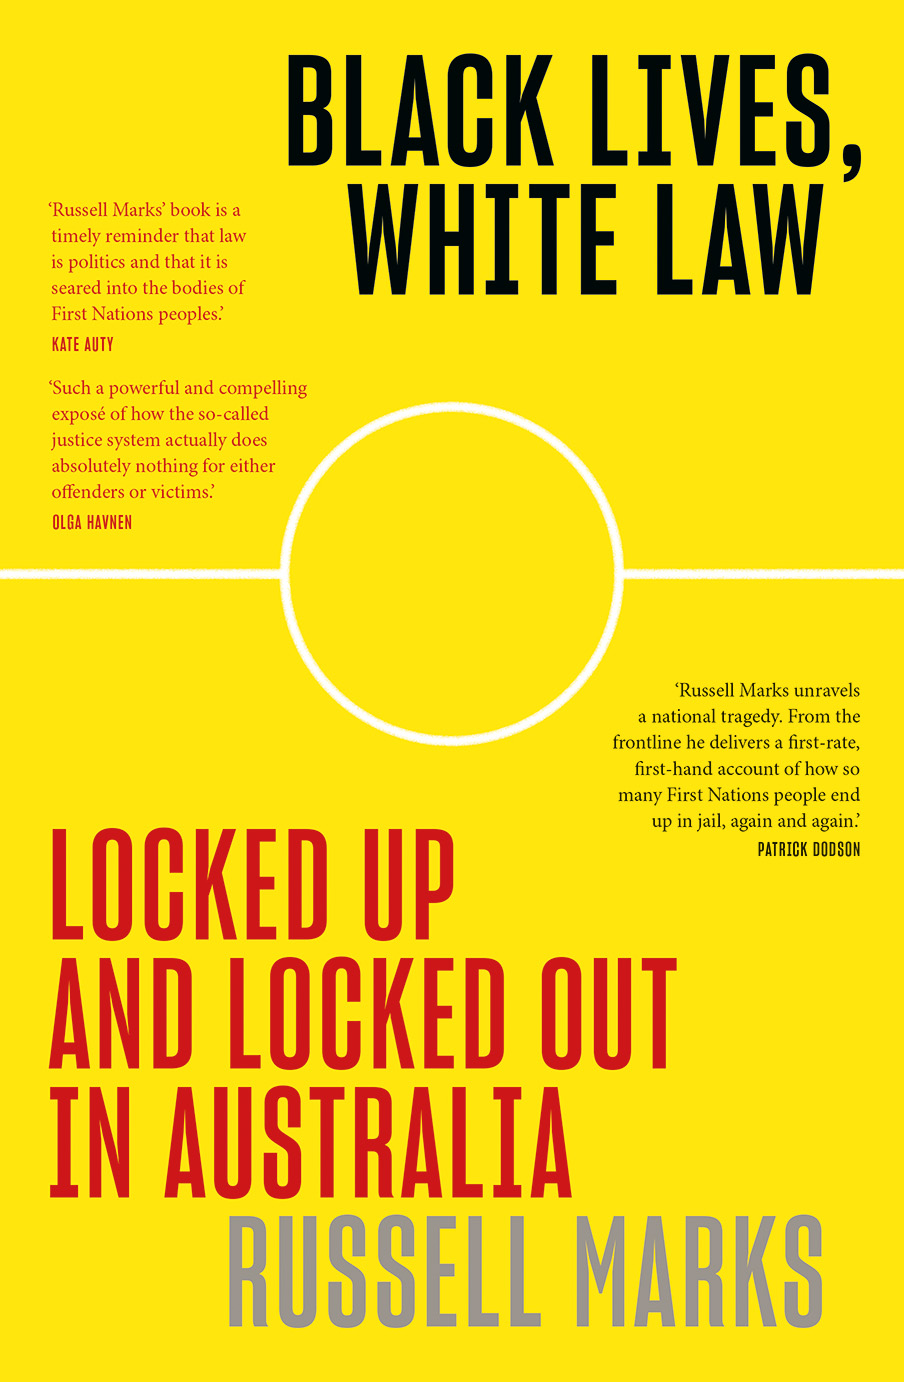 Black Lives, White Law: Locked up and locked out in Australia